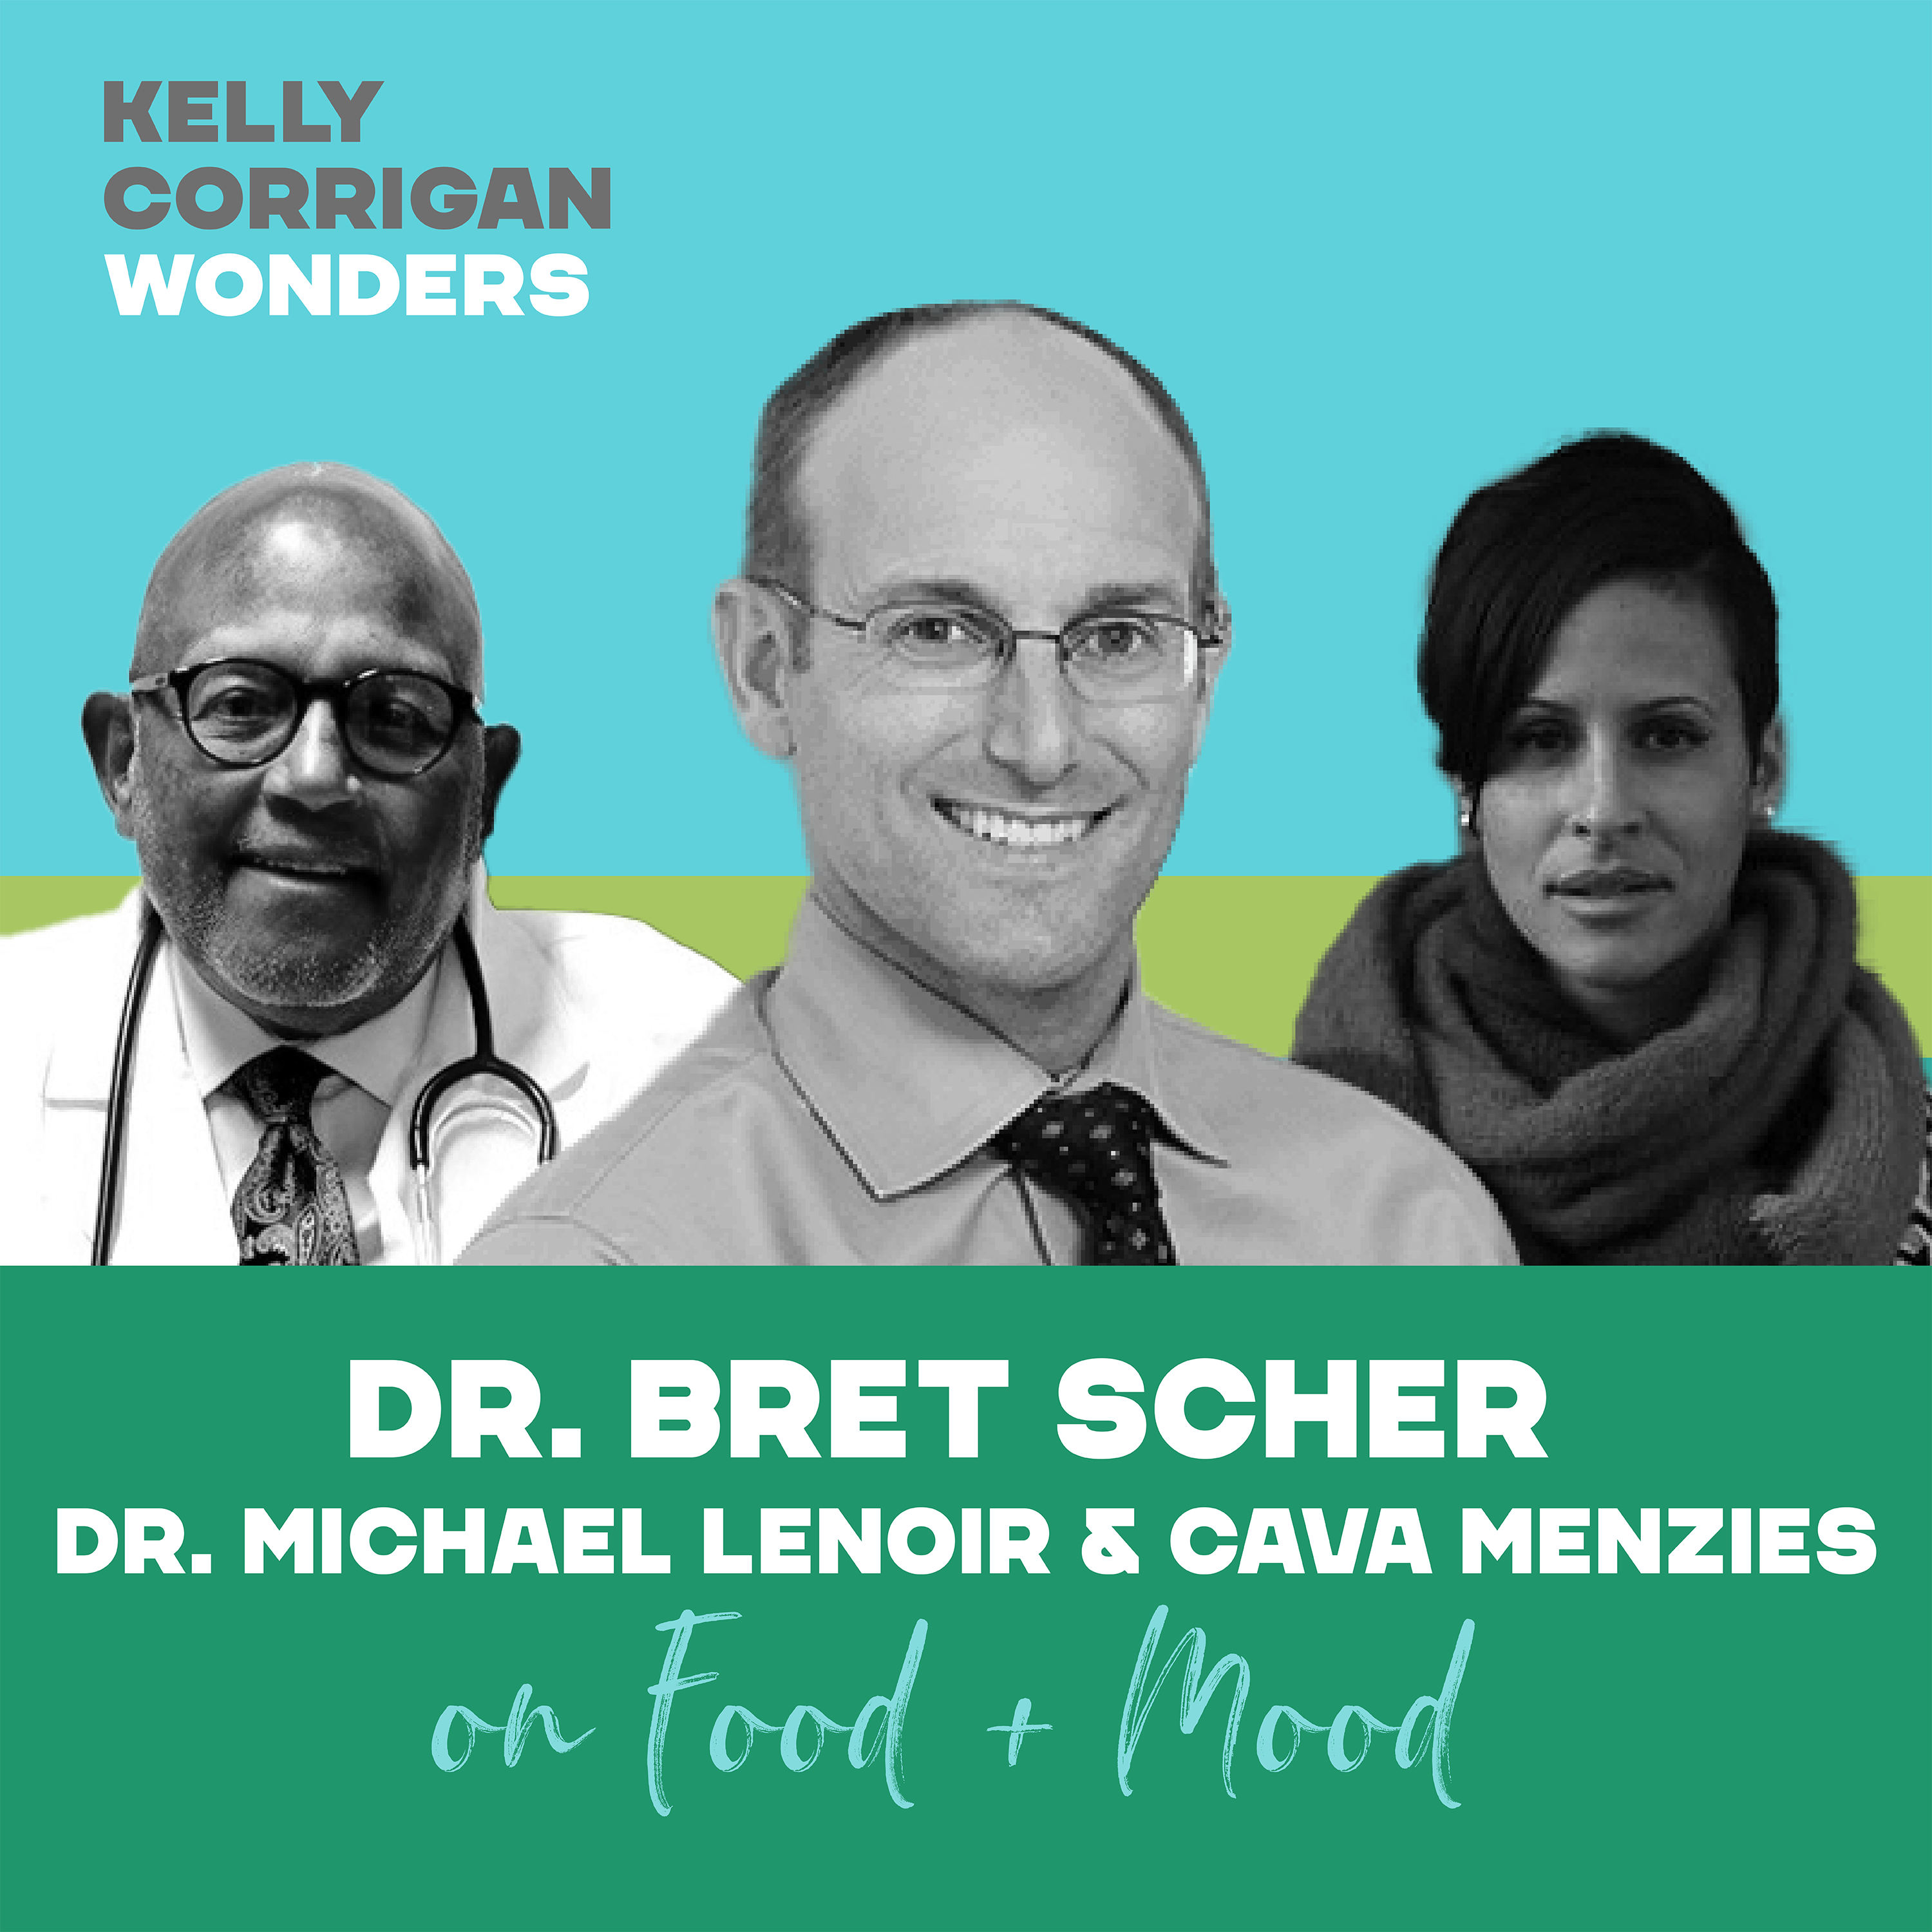 Going Deep on Nutrition and Well Being with Dr. Bret Scher, Dr. Michael Lenoir and Cava Menzies